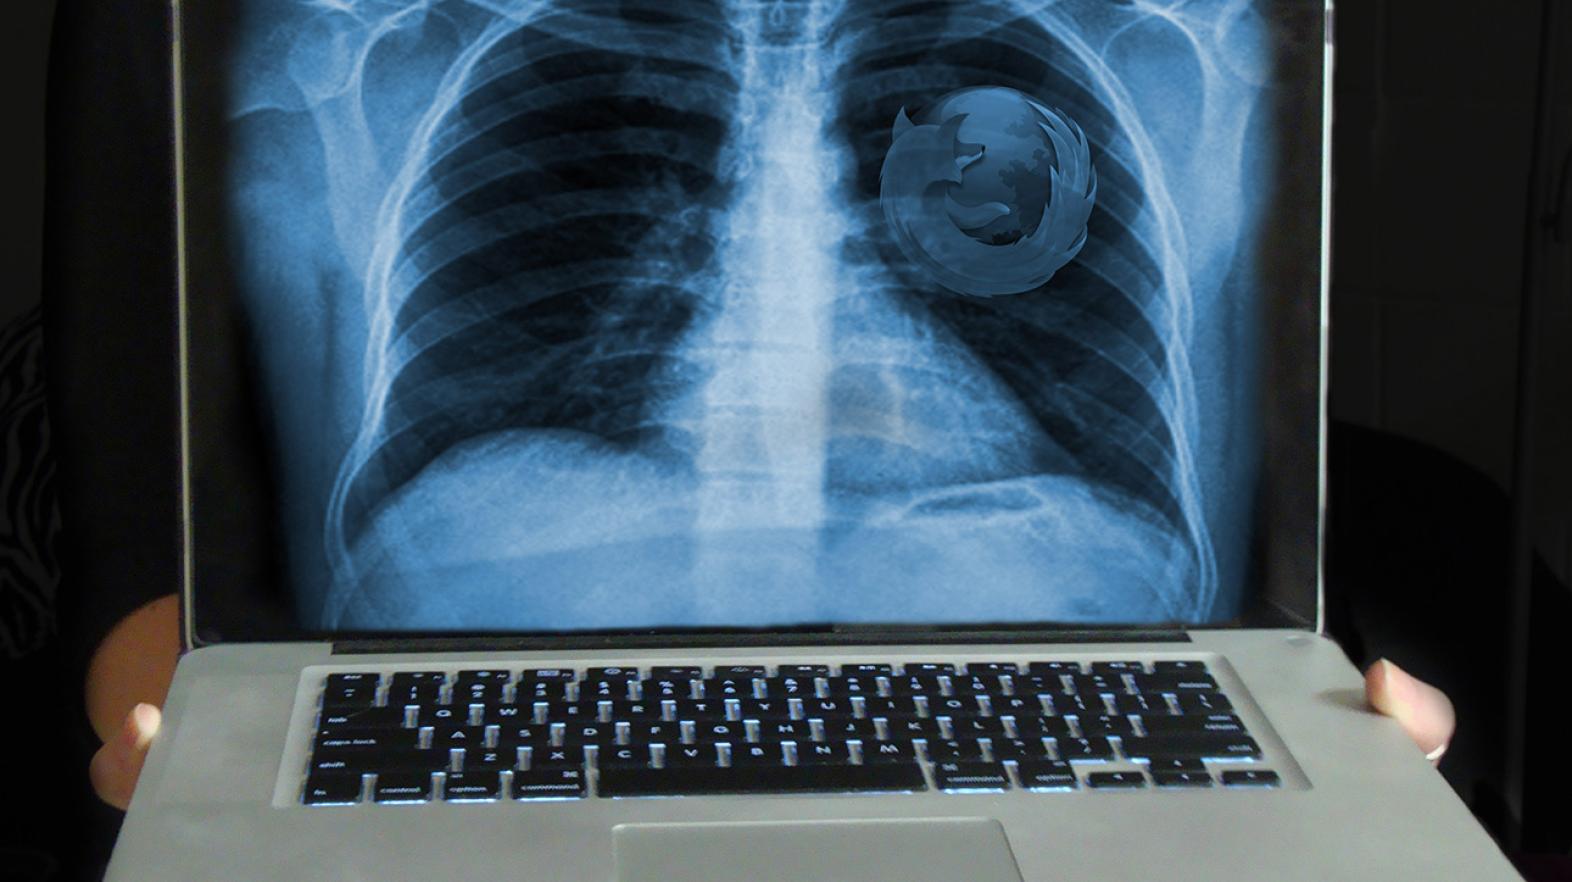 A piece of student work that depicts an image of an x-ray of the chest with the Mozilla Firefox logo where the heart should be on a laptop.